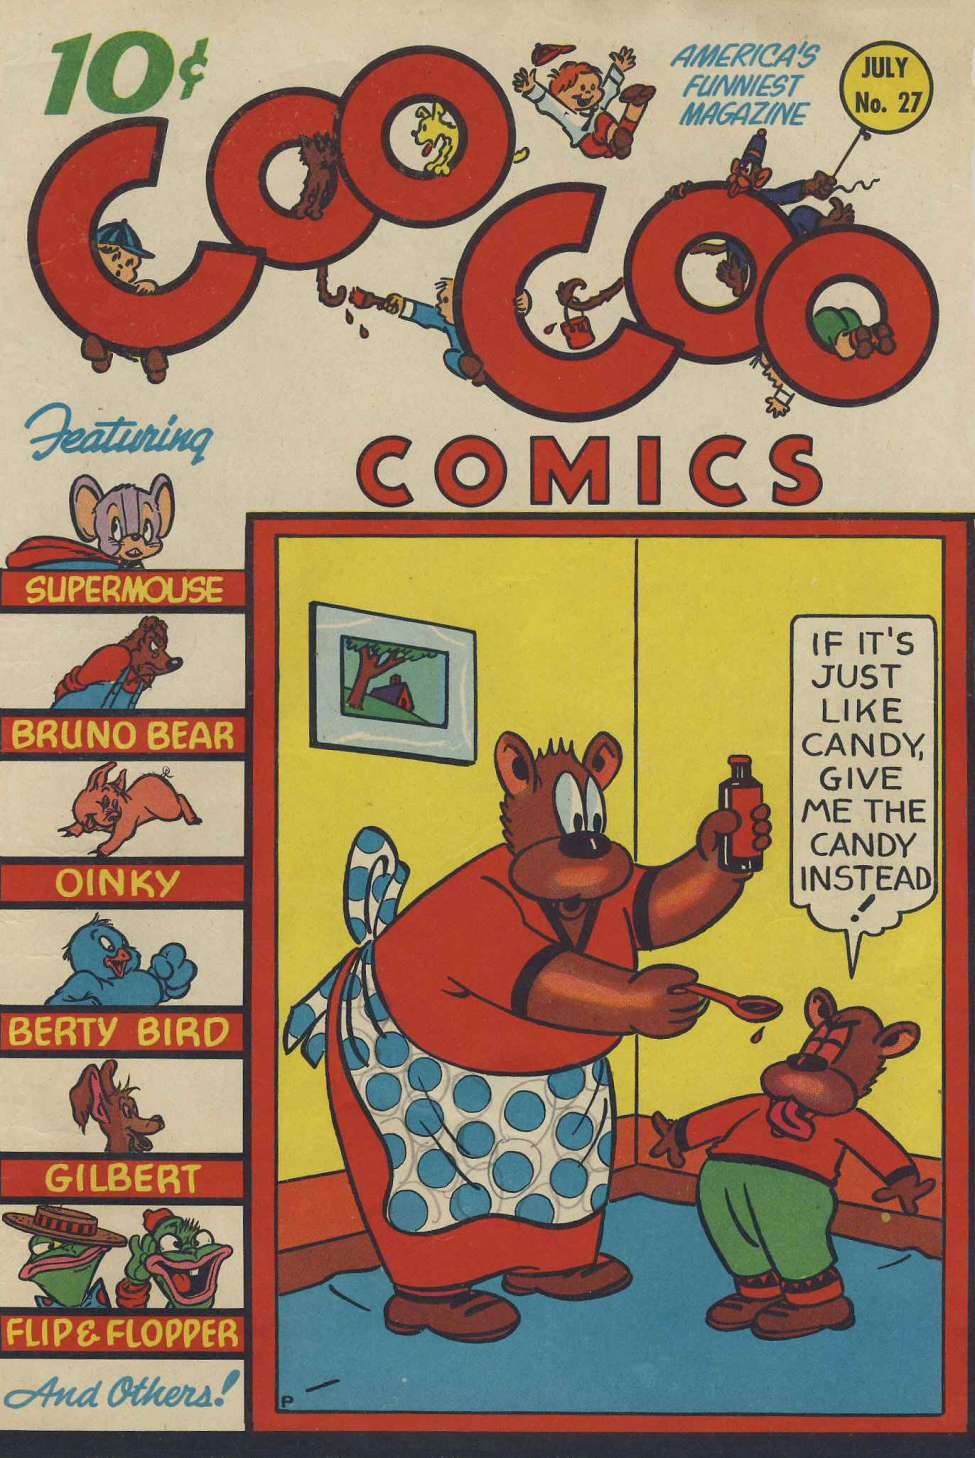 Book Cover For Coo Coo Comics 27